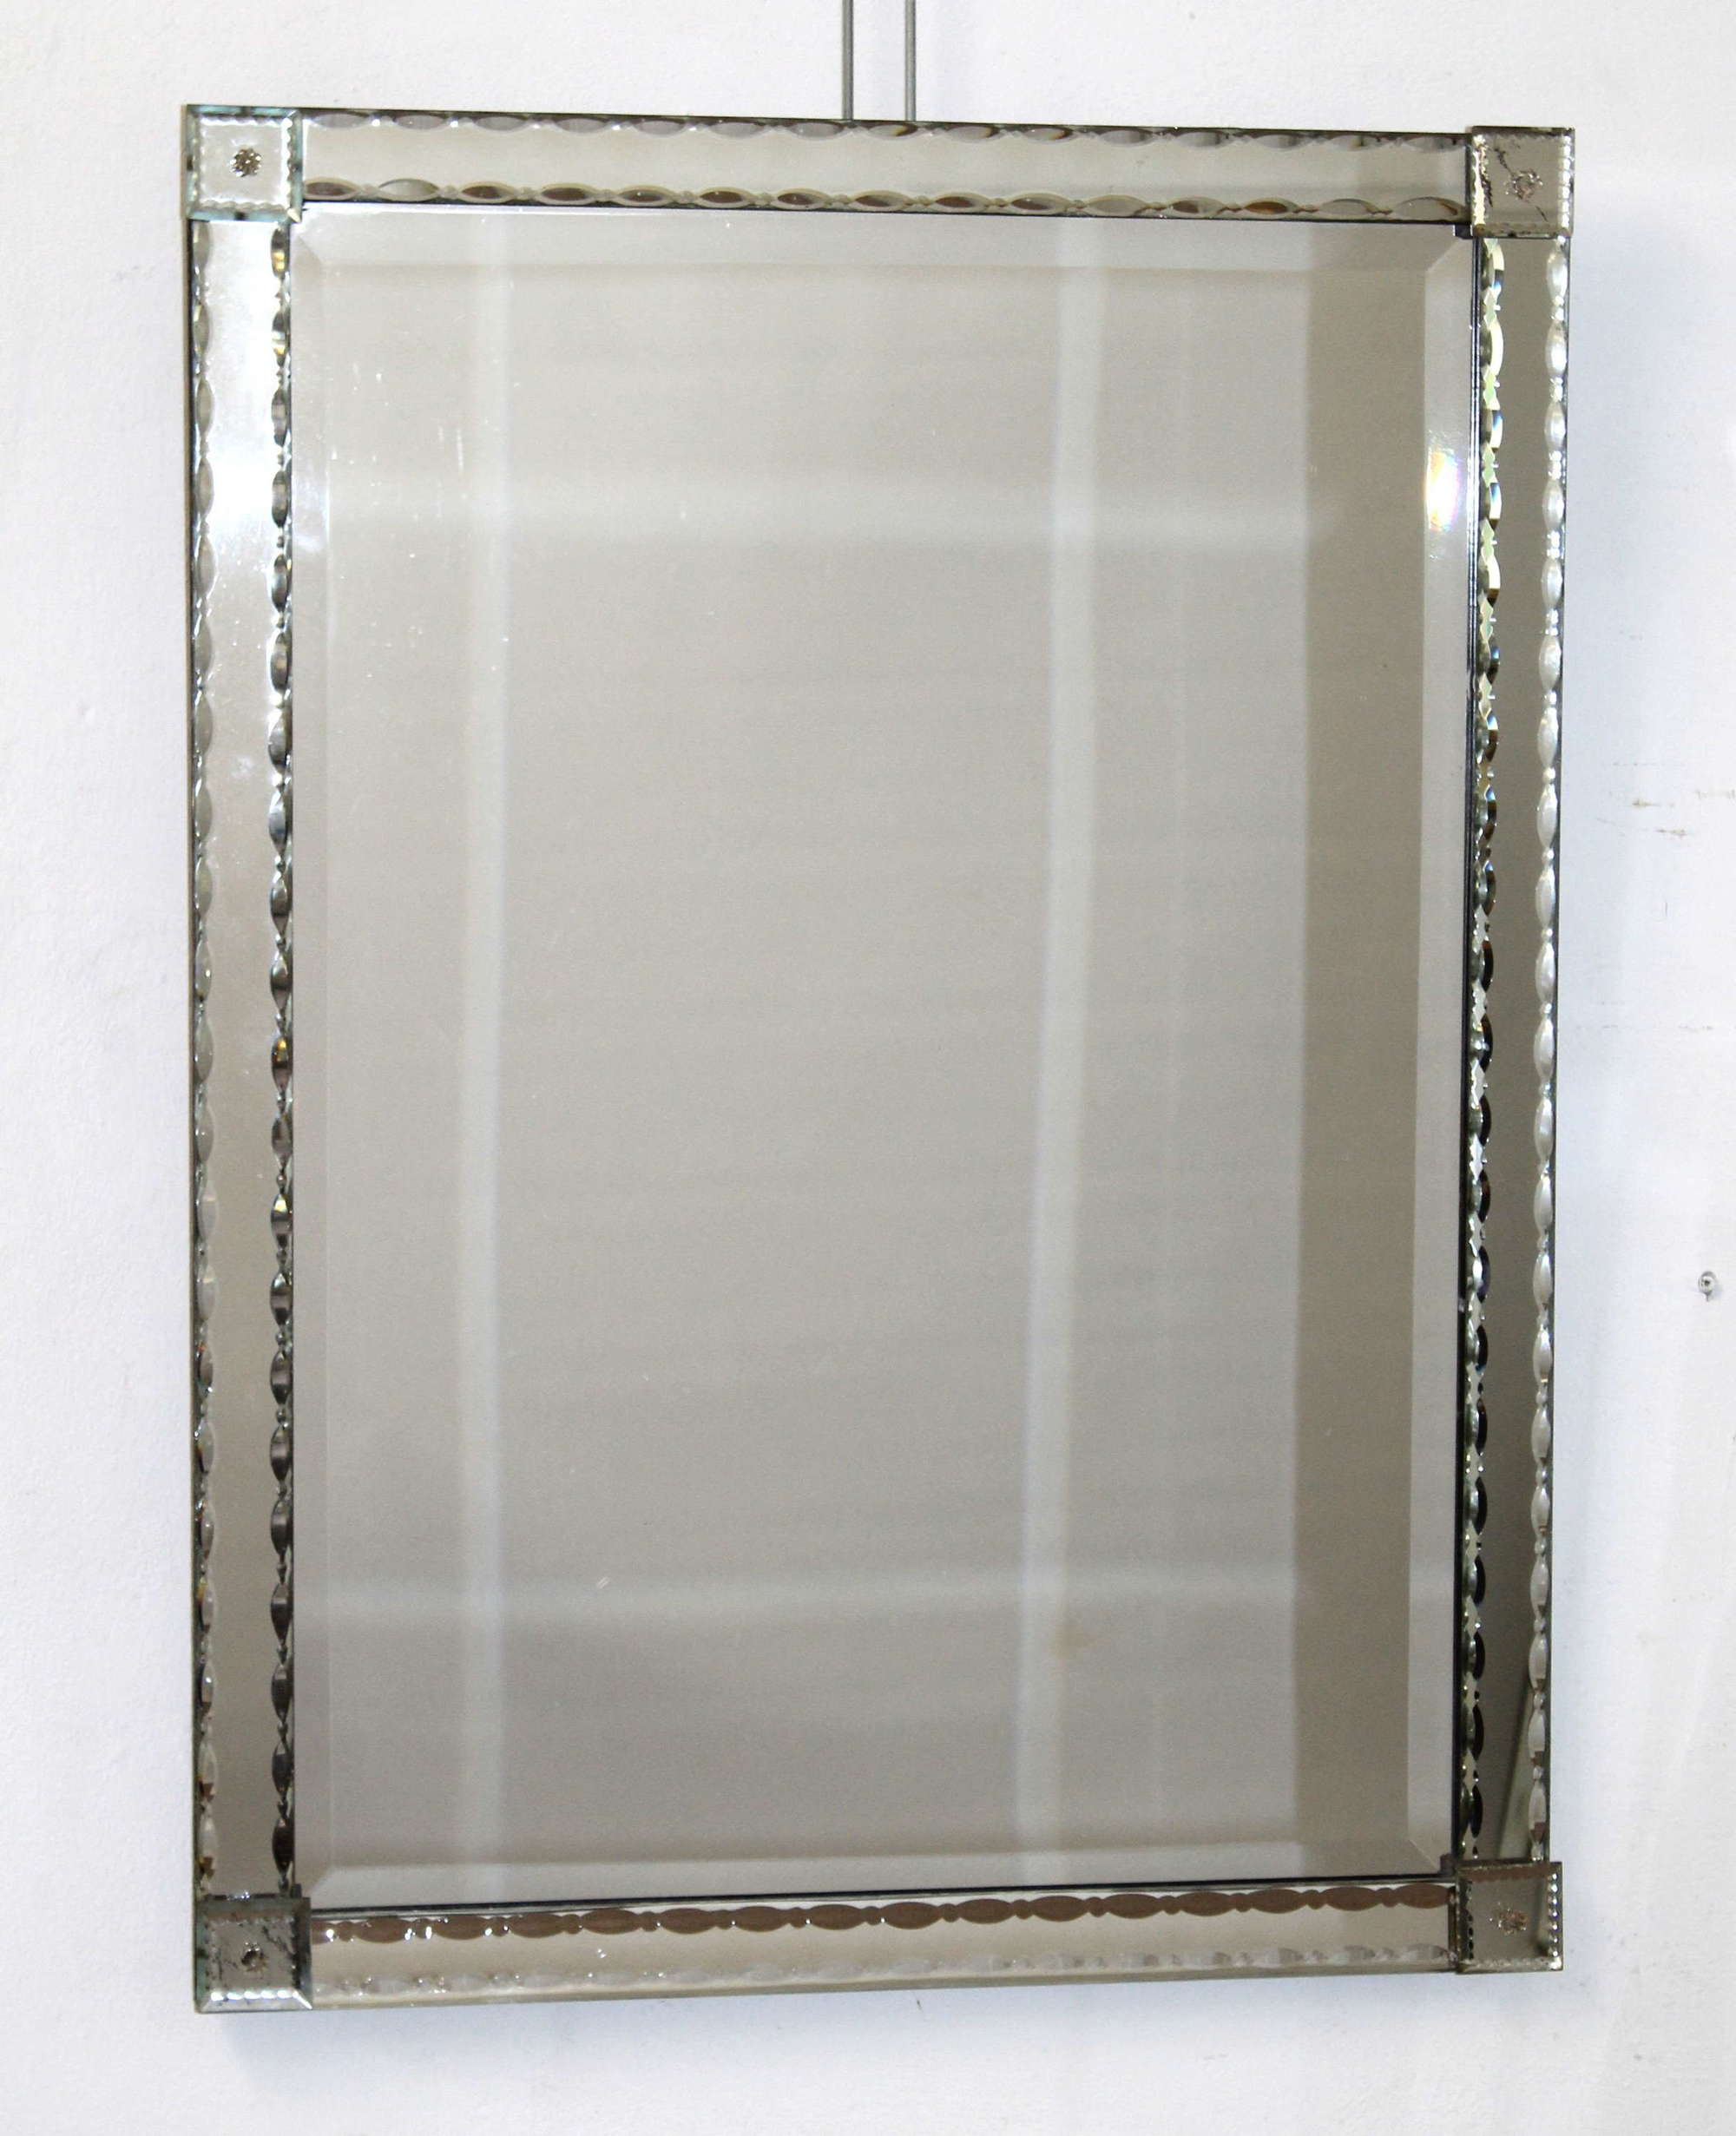 Vintage Venetian style mirror with delicate frame